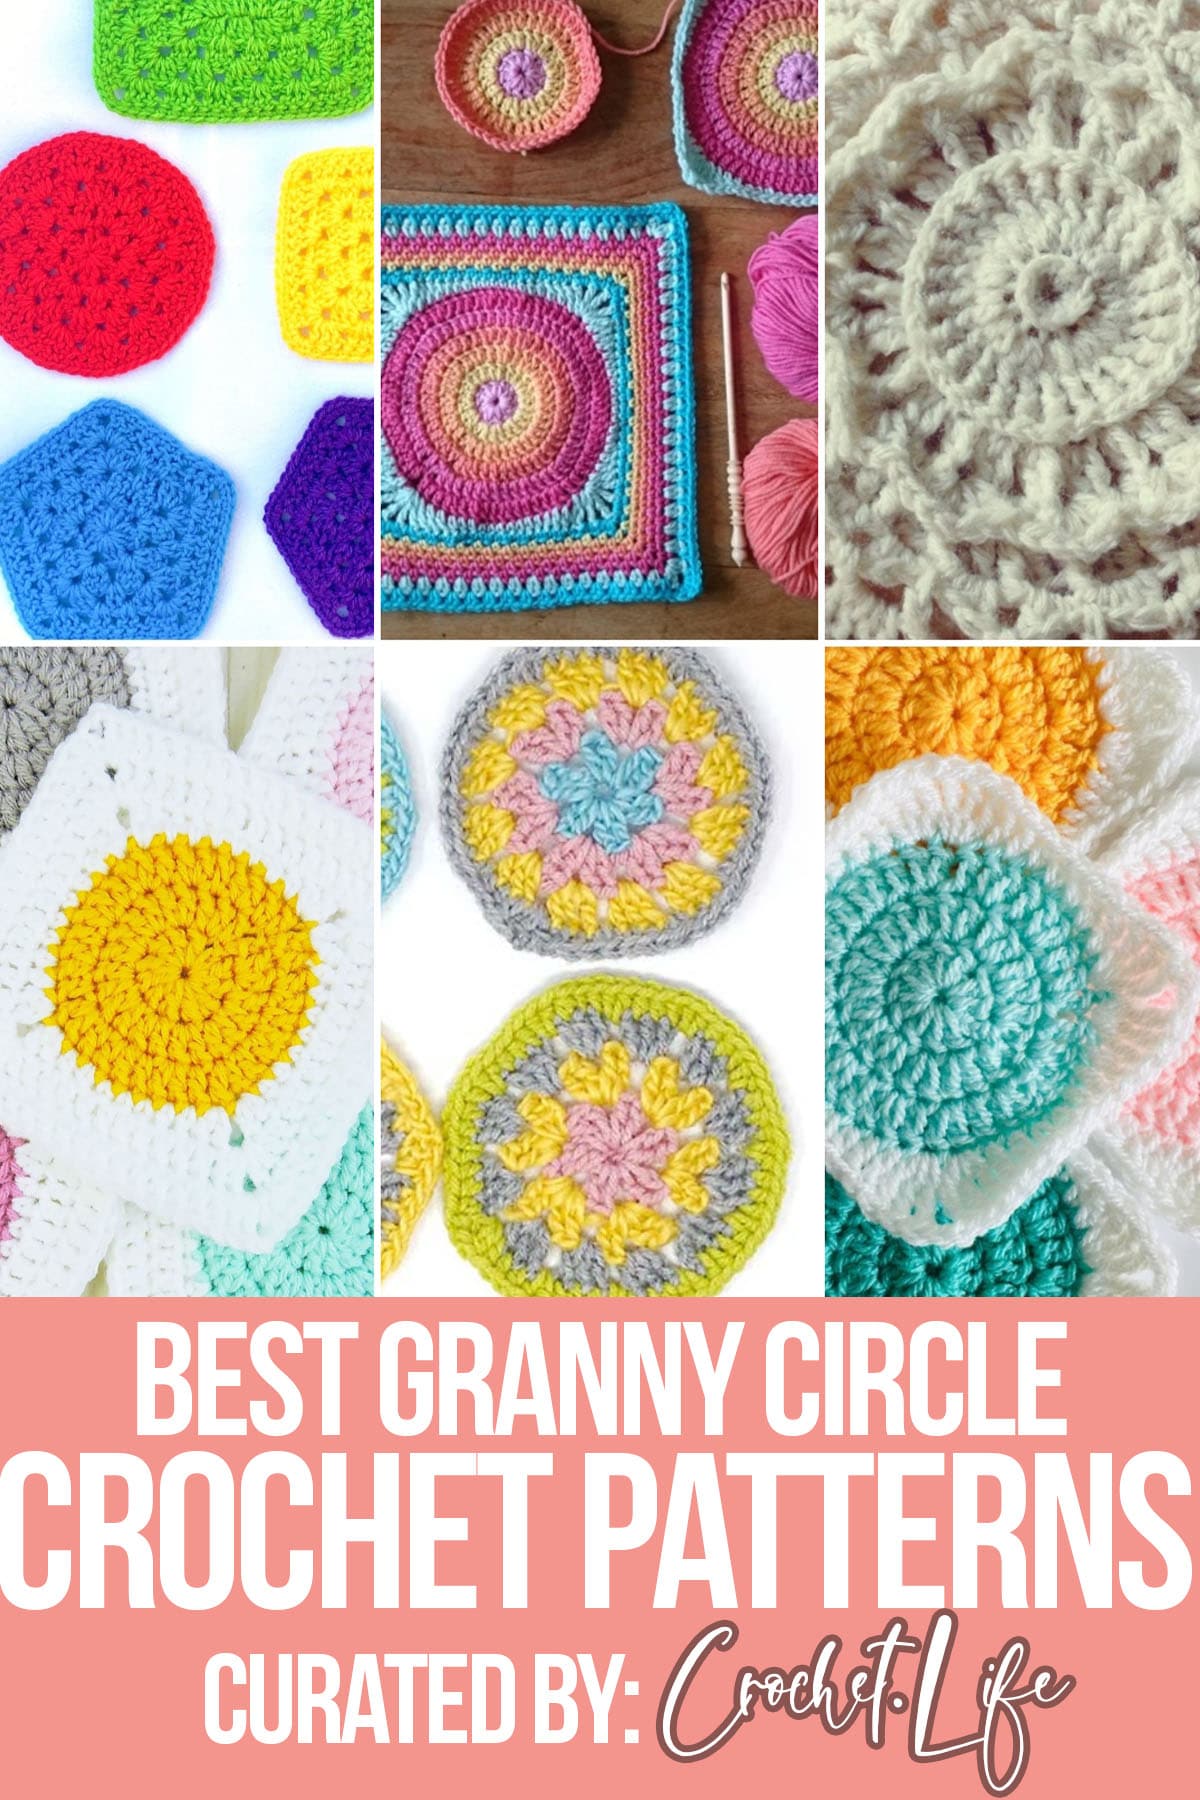 photo collage of crochet patterns for granny circles with text which reads best granny circle crochet patterns curated by crochet.life